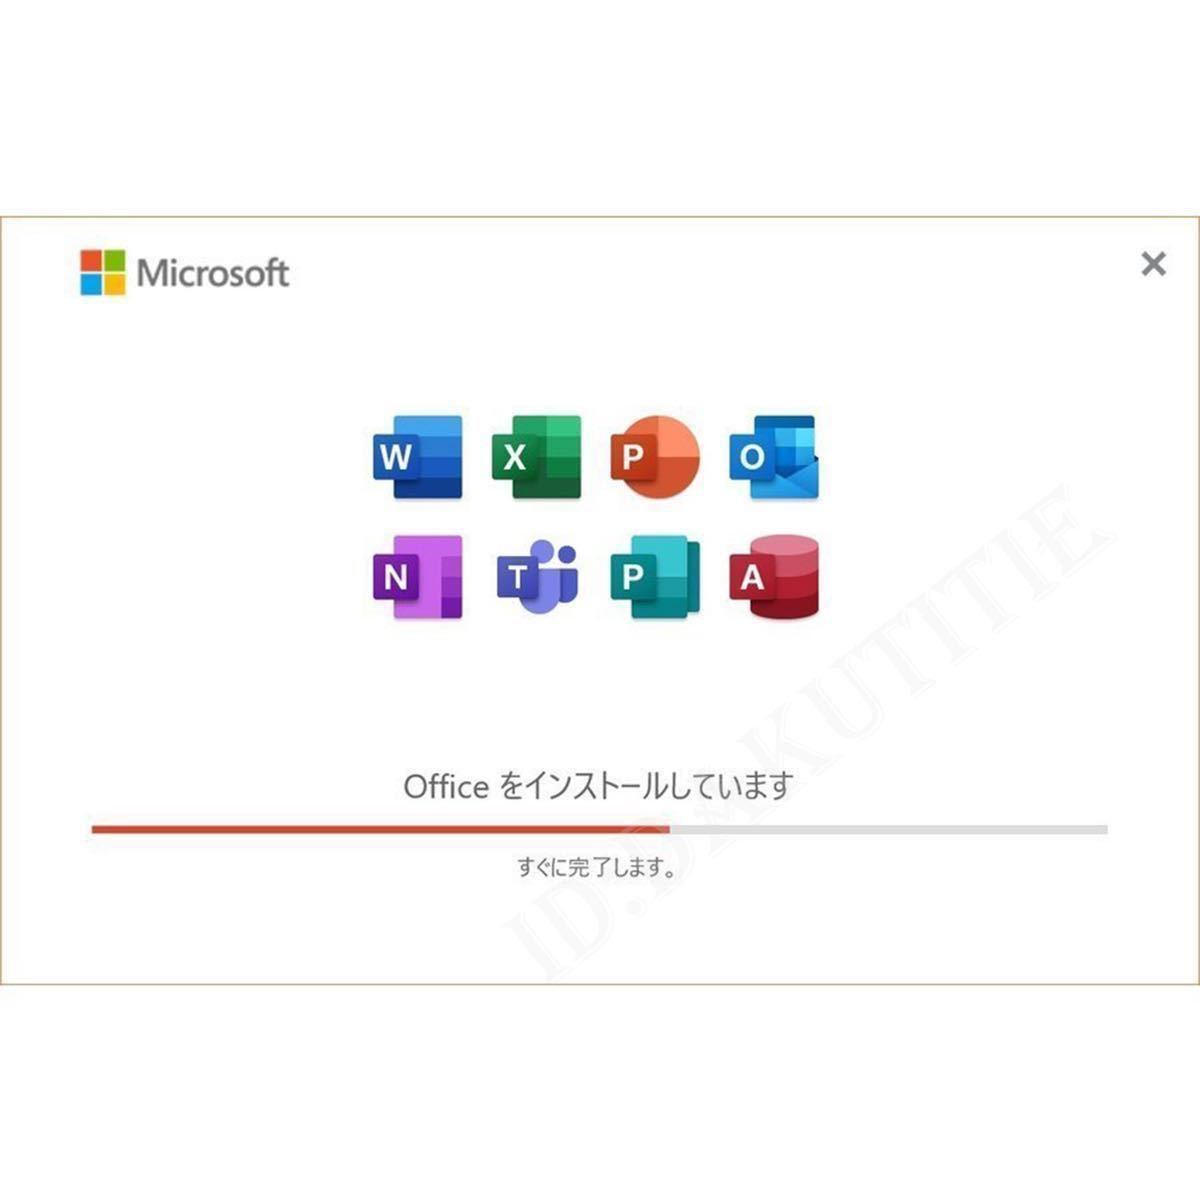 【Office2021 永年正規保証】Microsoft Office 2021 Professional Plus オフィス2021 プロダクトキー Access Word Excel PowerPoin 日本語